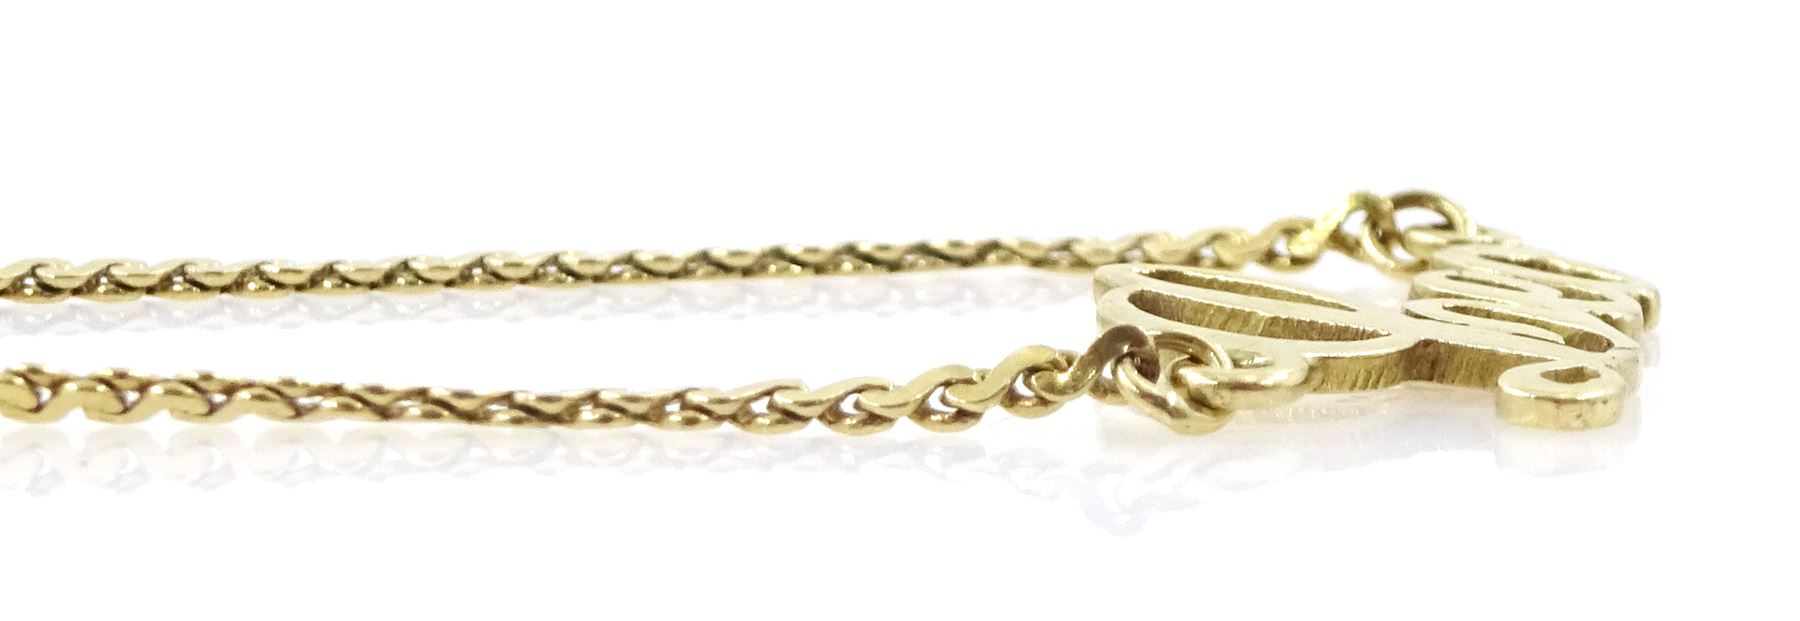 17ct gold 'Leo' necklace - Image 2 of 2